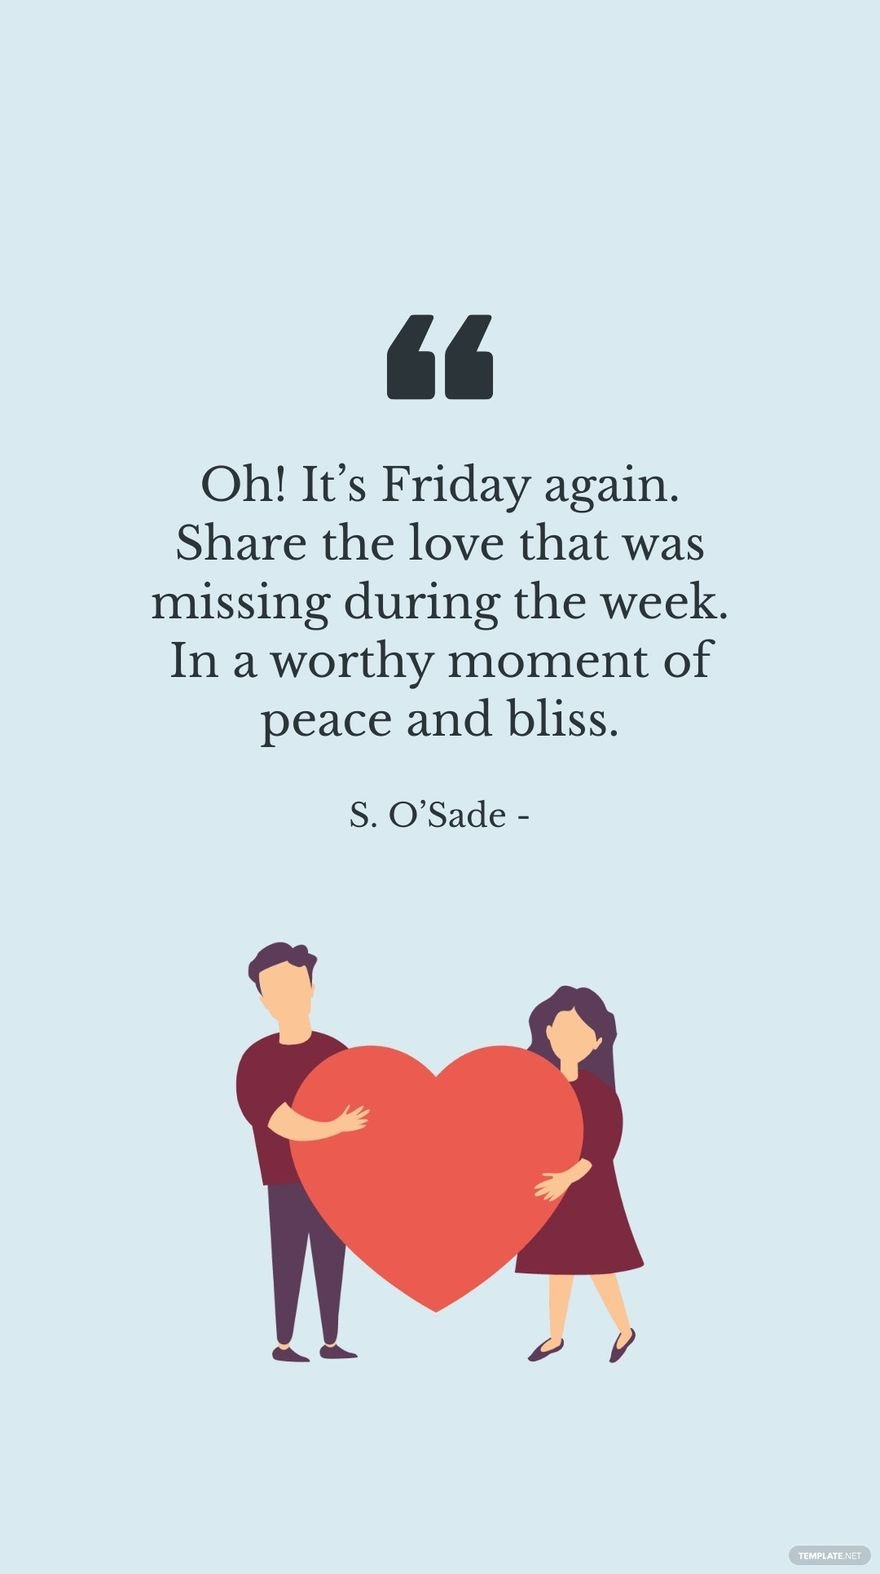 S. O’Sade - Oh! It’s Friday again. Share the love that was missing during the week. In a worthy moment of peace and bliss.